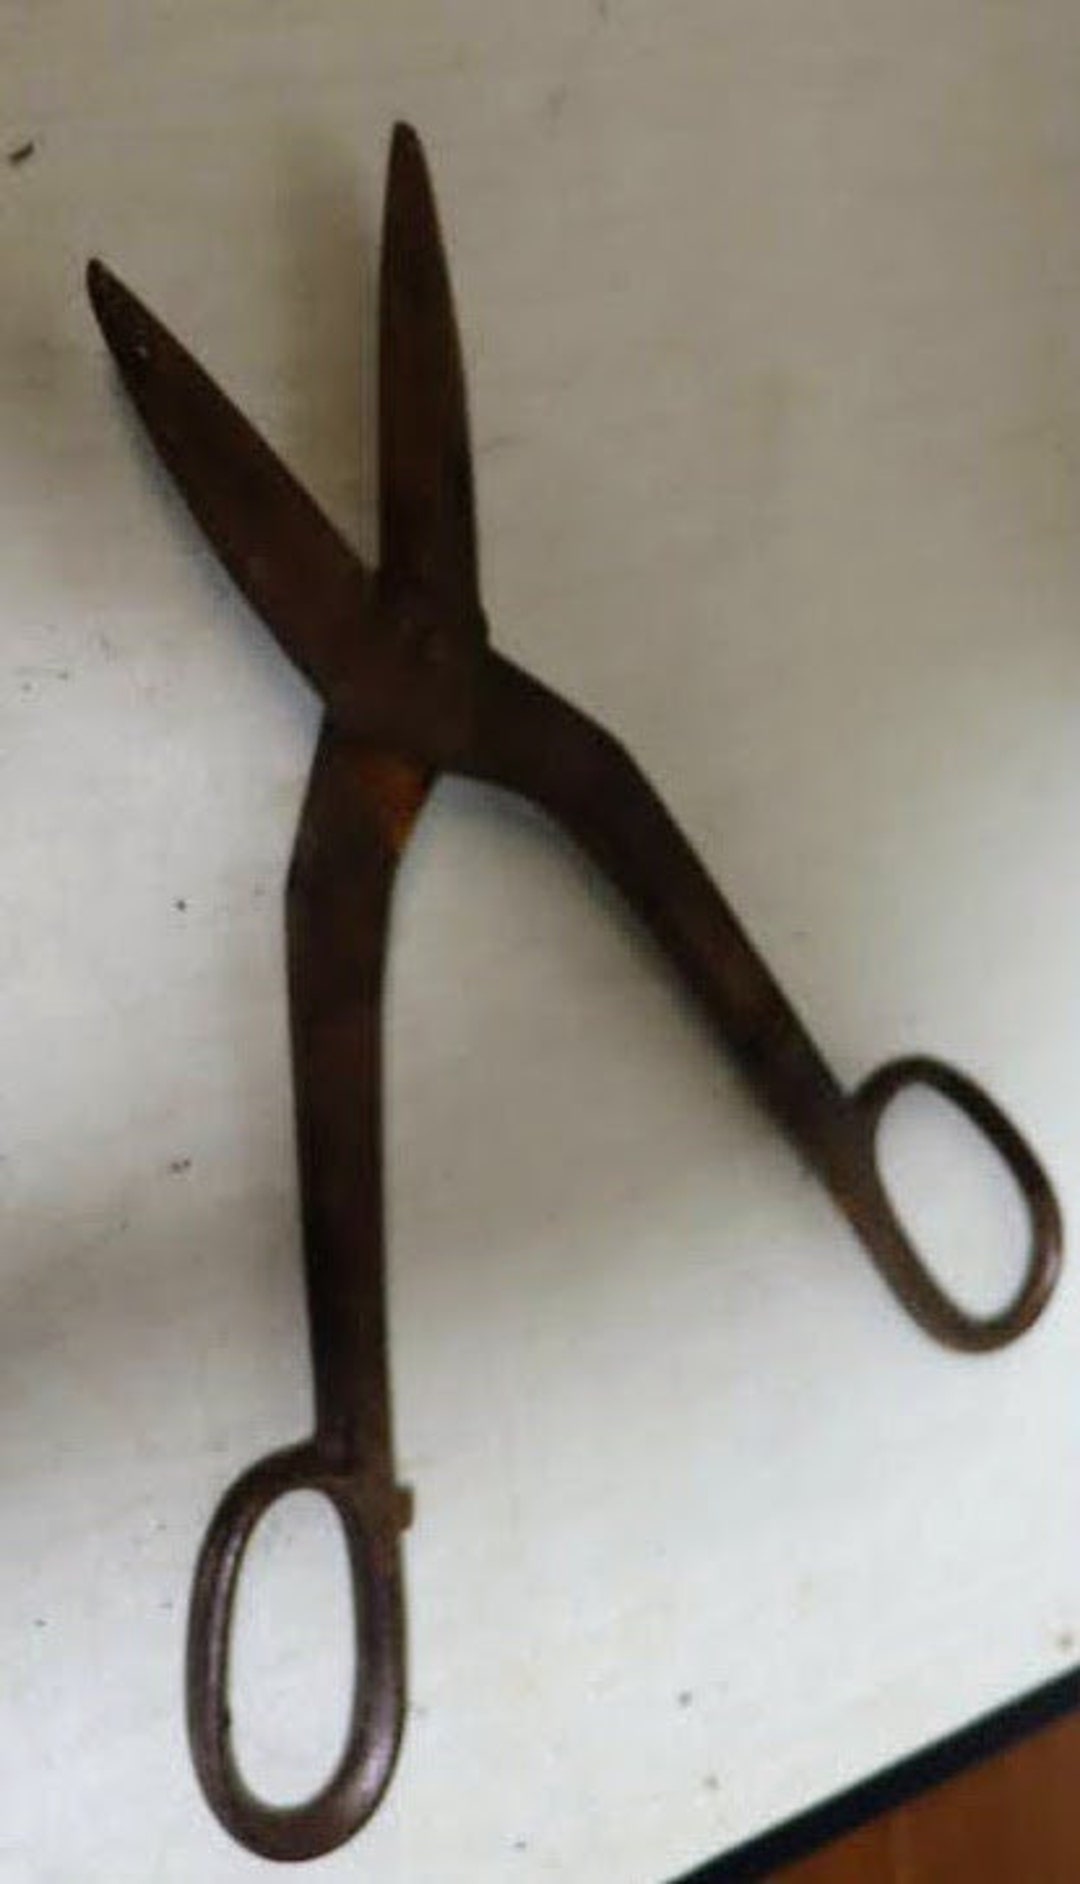 Vintage Wiss A-9 Tin Snips, Sheet Metal Shears, Made in USA 